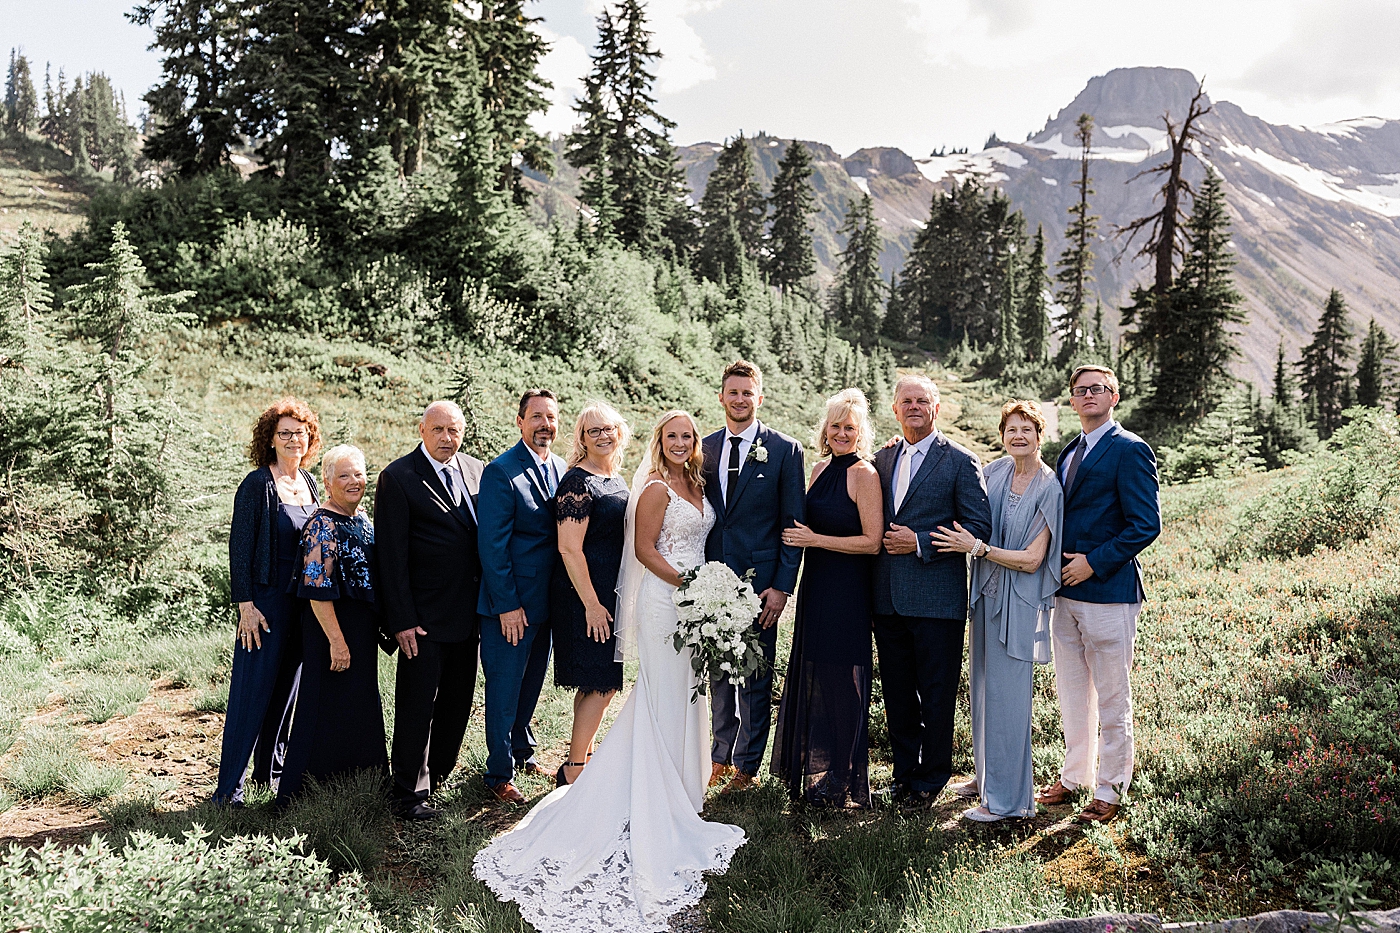 Couple elopes with immediate family at Mount Baker. Photo by Megan Montalvo Photography.